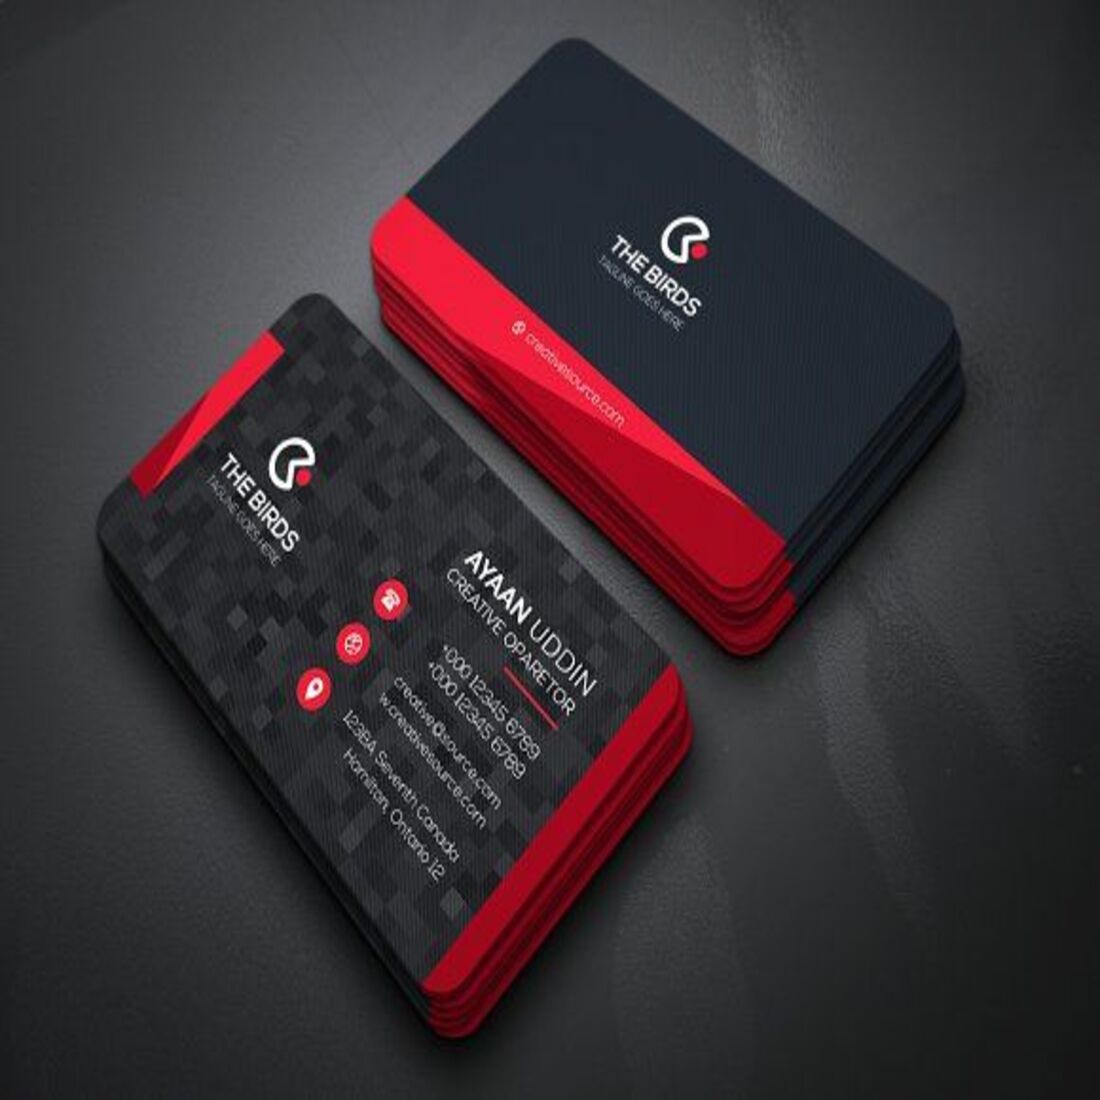 8 UNIQUE BUSINESS CARDS ONLY IN $10 cover image.